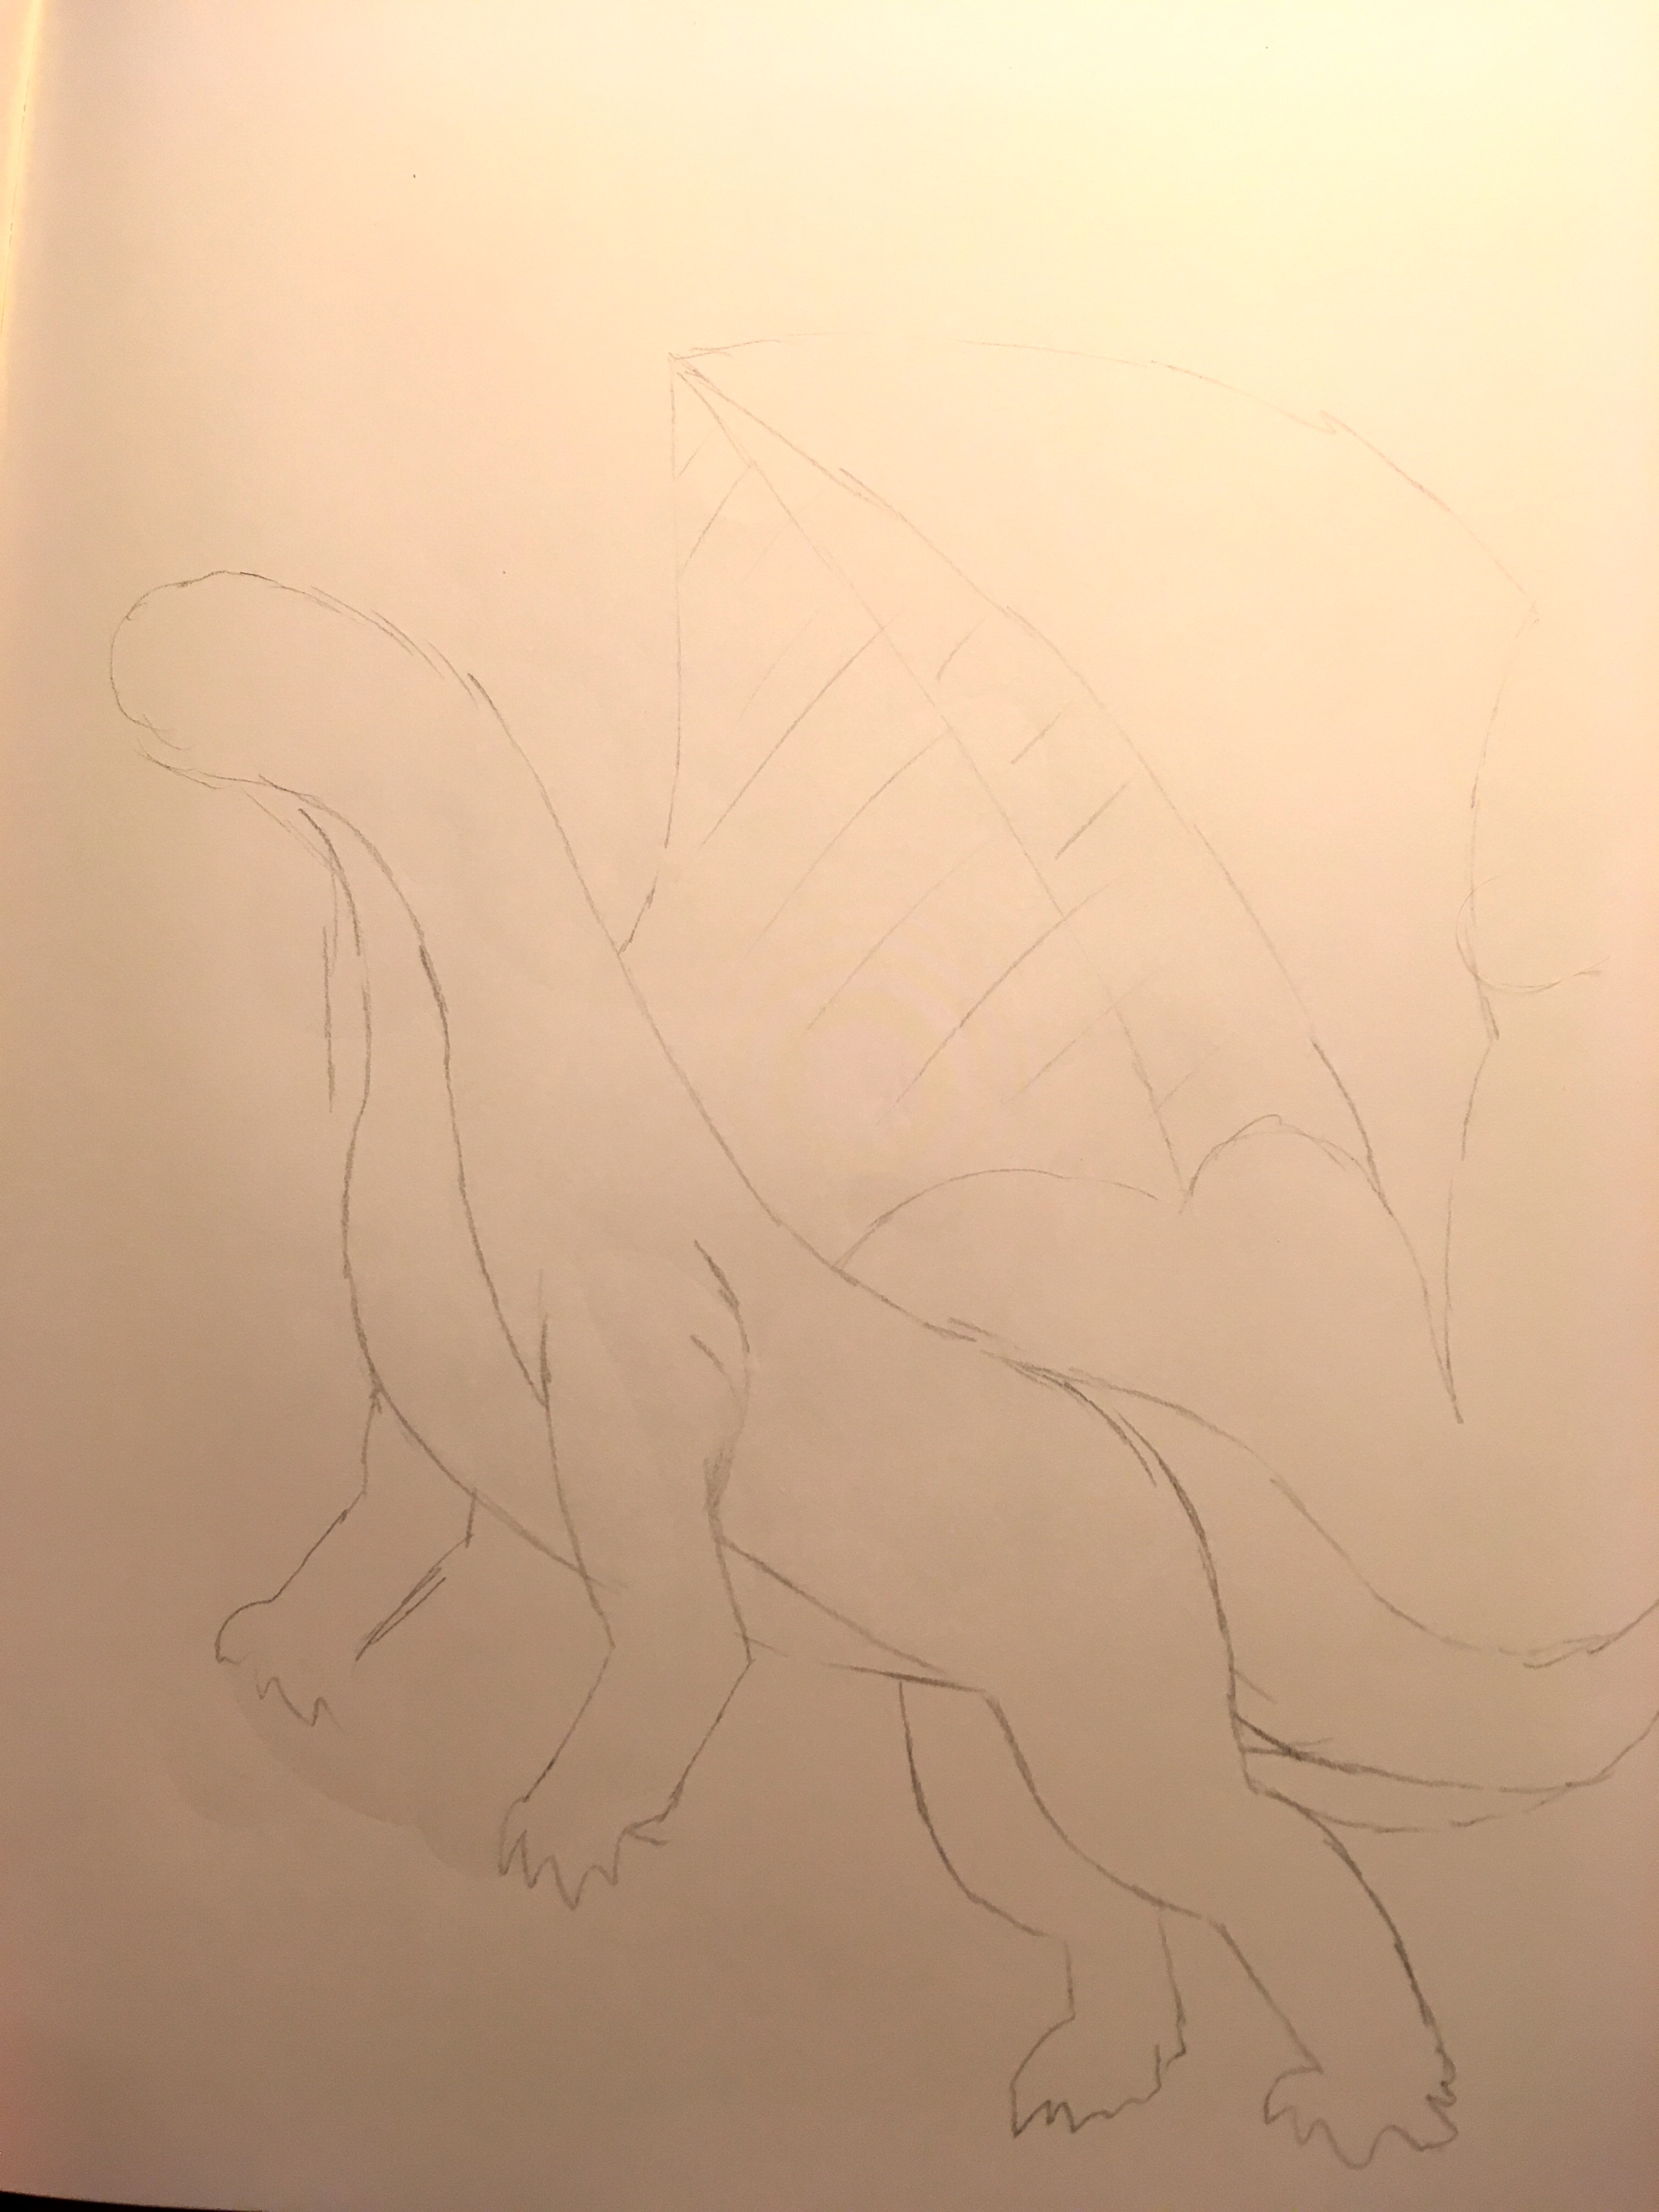 The start of a more realistic dragon in pencil. Head not finished